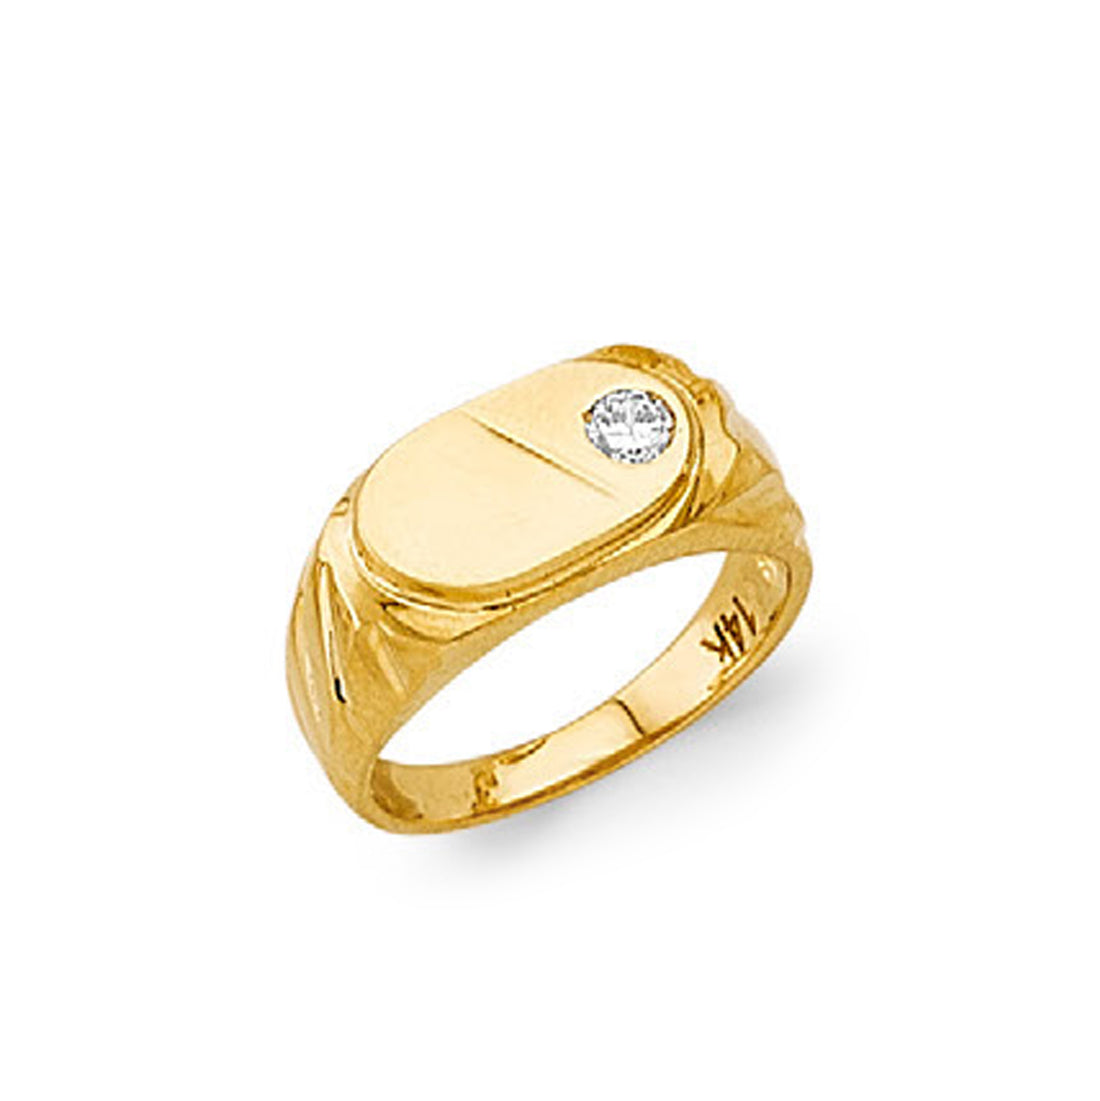 CZ Gorgeous Single stone Signet Ring in Solid Gold 